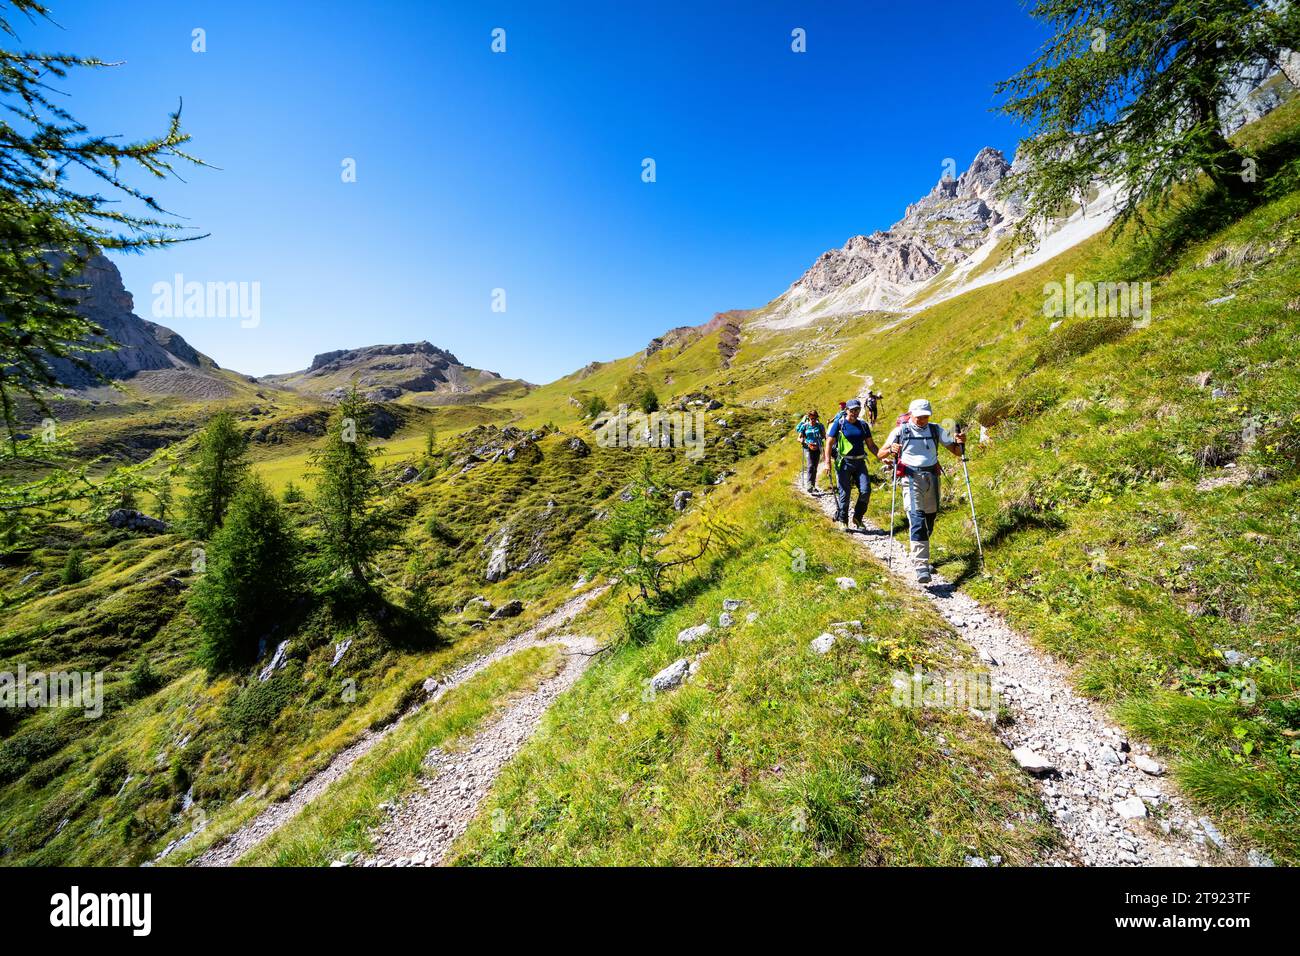 Hiking on Alta Via 2, summit of Forca Rossa pass in the background, near Rocca Pietore, Italy Stock Photo